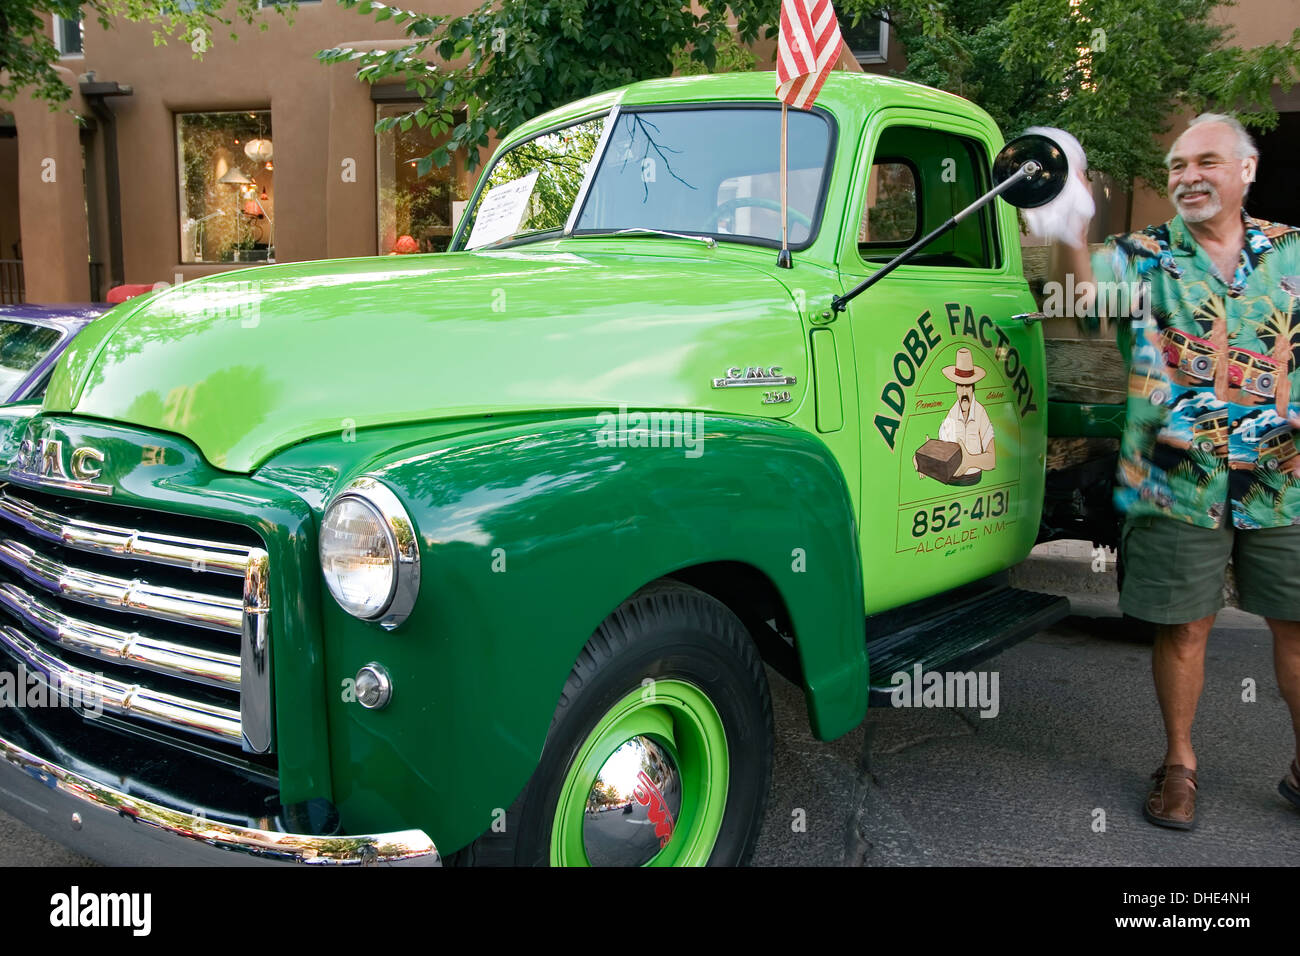 "Adobe Factory" antique GMC truck and owner, Pancakes on the Plaza Fourth of July Celebration, Santa Fe, New Mexico USA Stock Photo